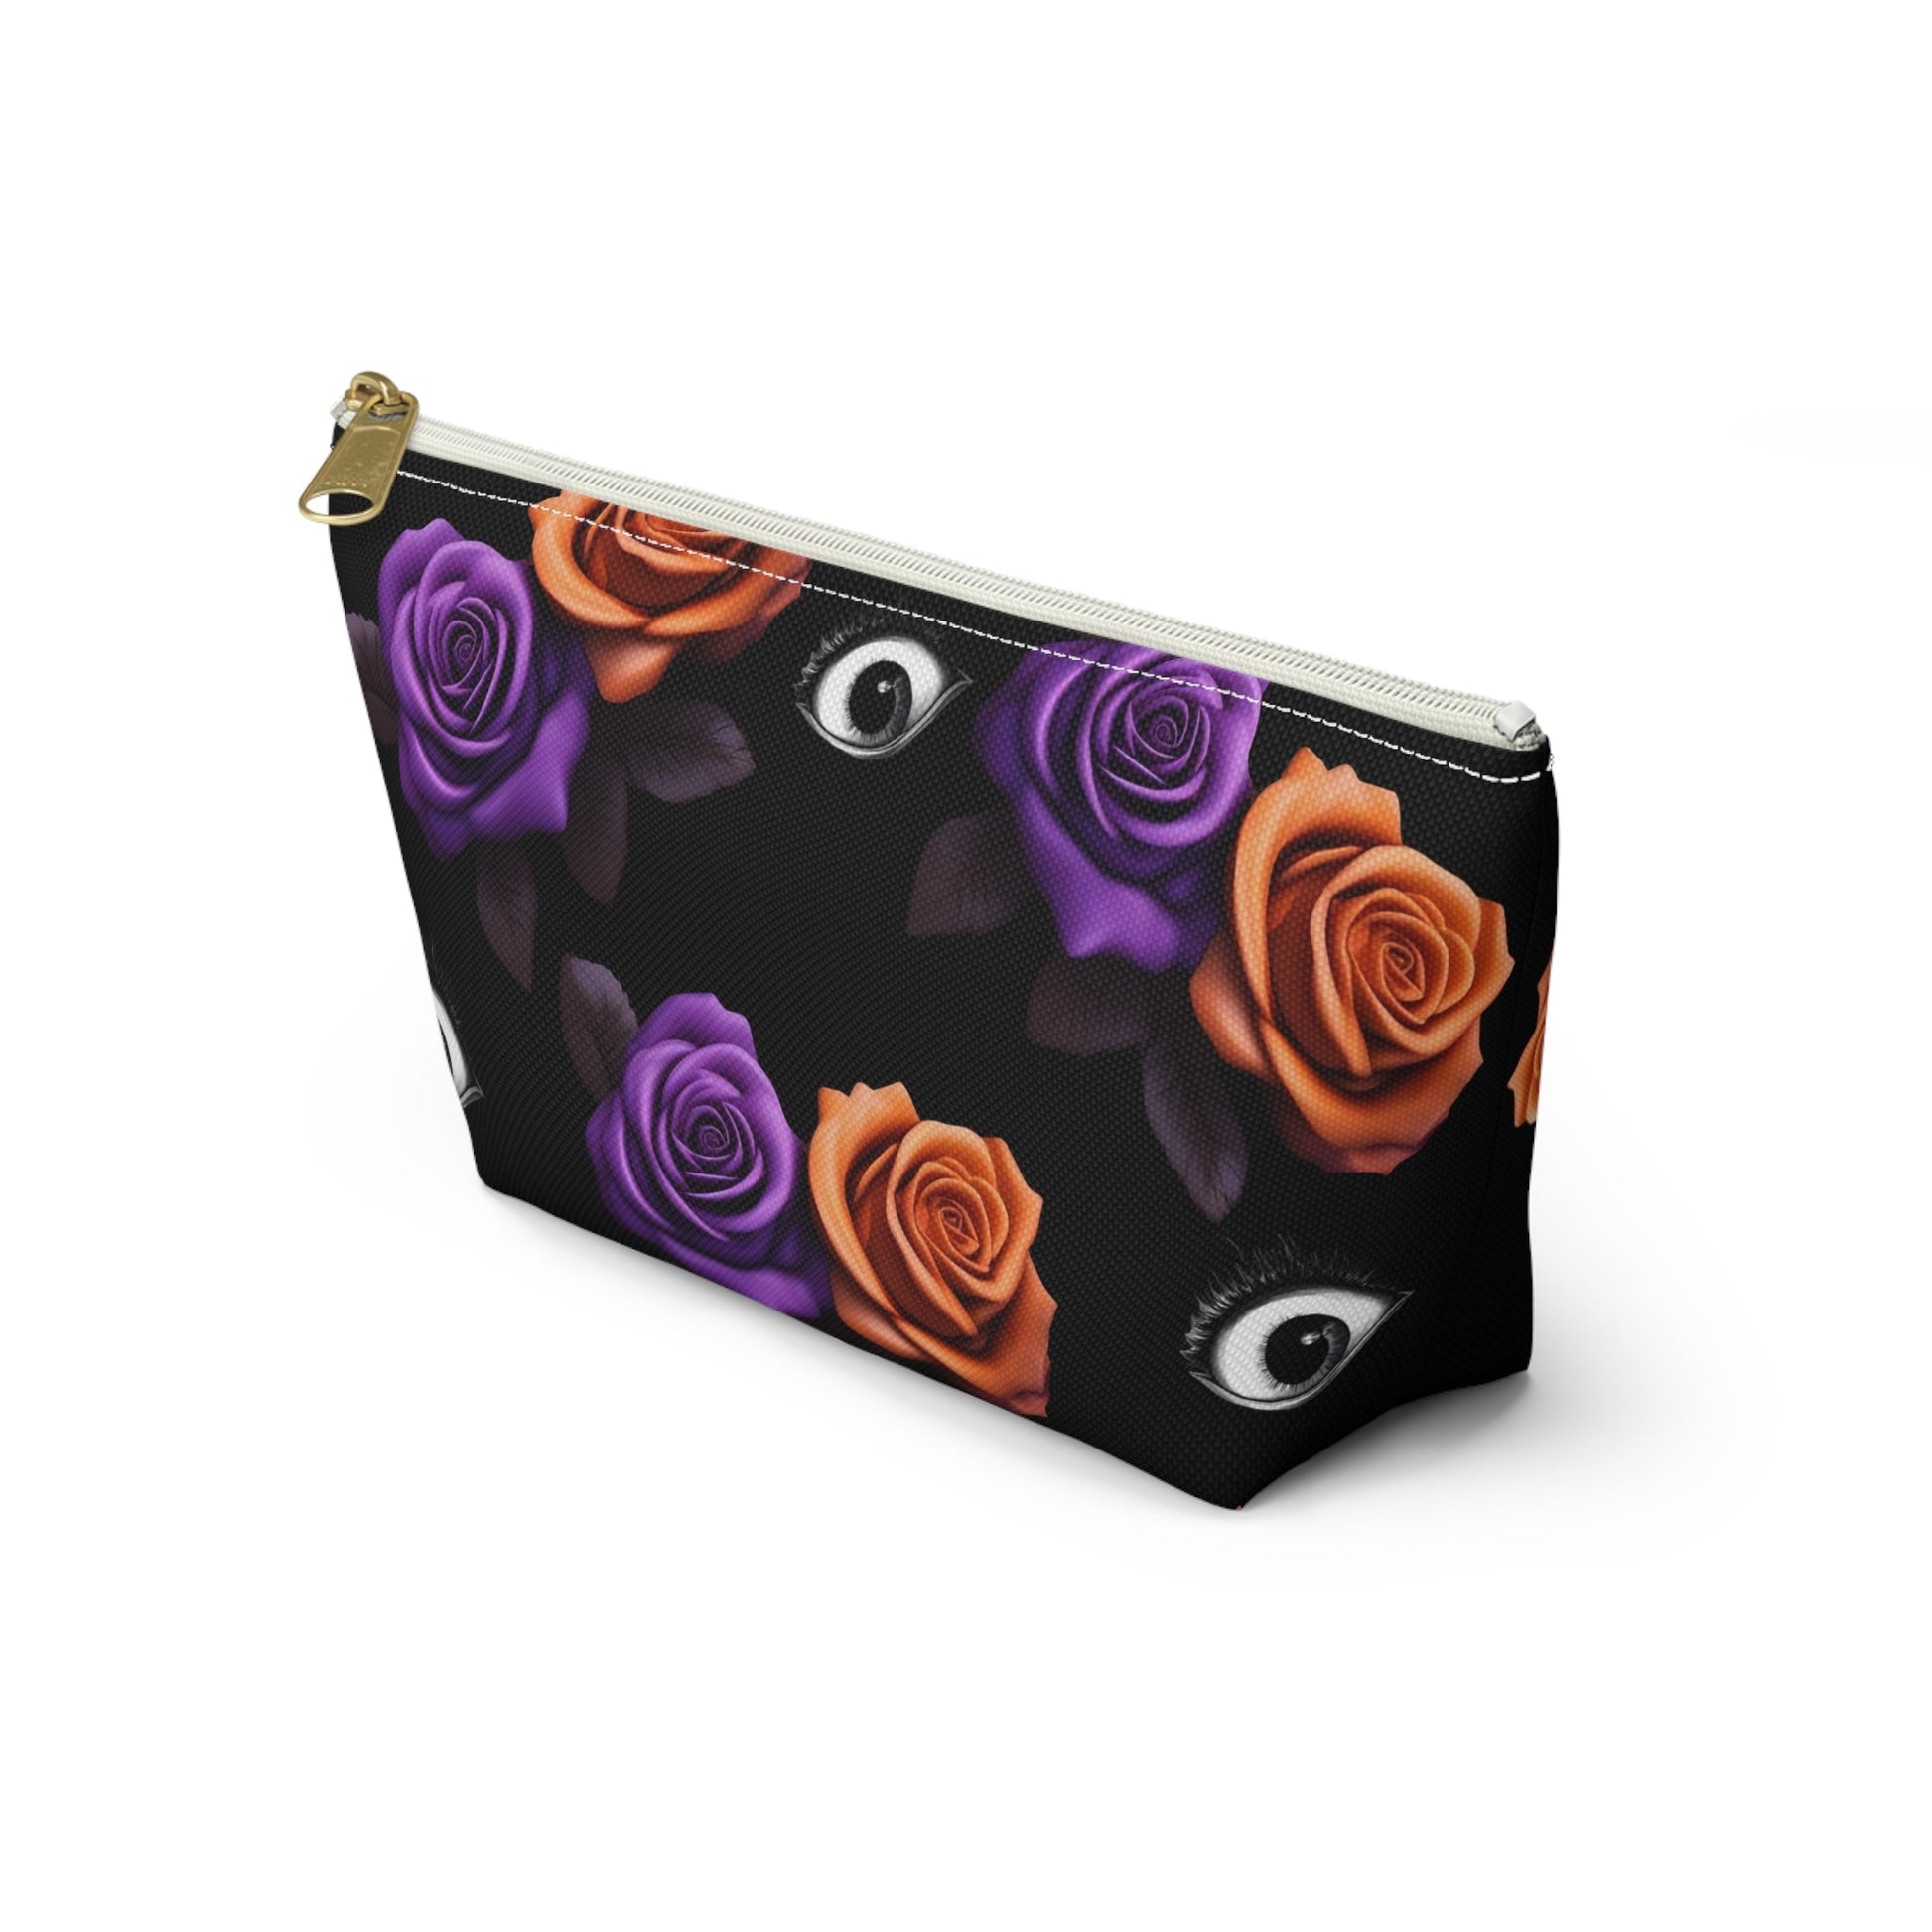 Orange and Purple Roses With Eyeballs Accessory Pouch Cosmetic BagBagsVTZdesignsLargeBlack zipperAccessoriesAll Over PrintAssembled in the USA